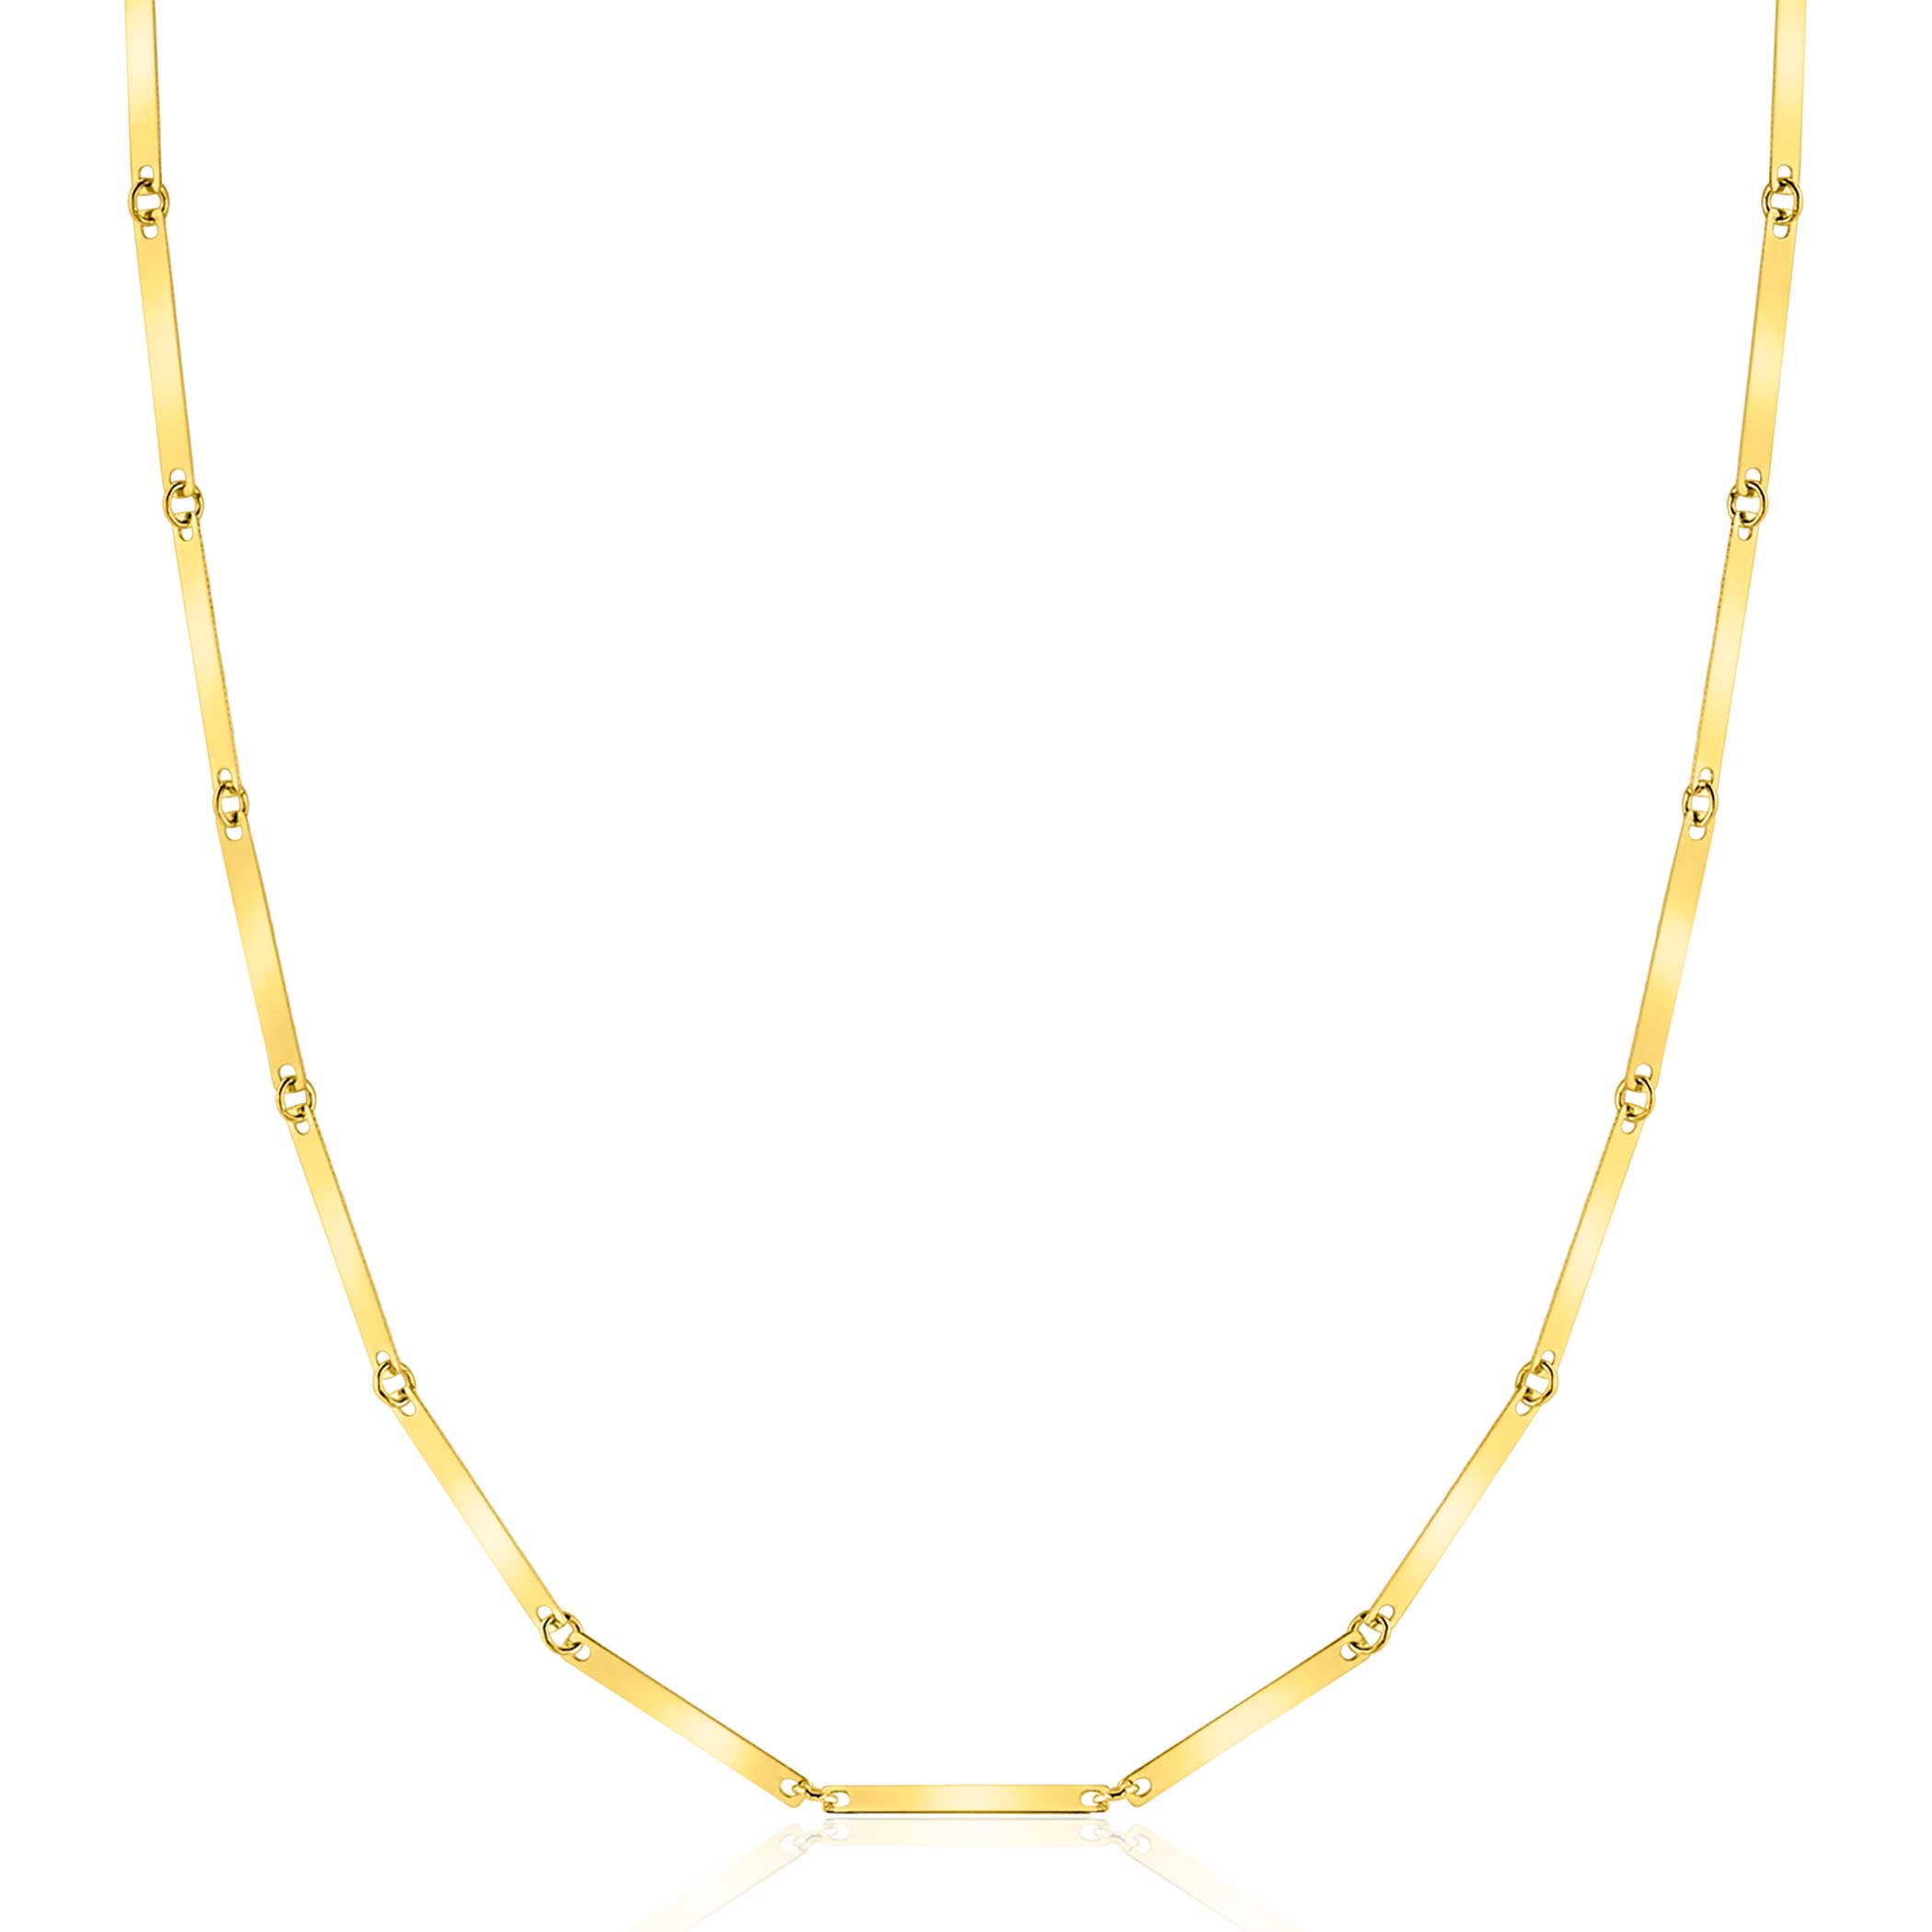 ZINZI Gold 14 karat gold solid chain necklace with elongated shiny bars 1.6mm wide 45cm ZGC491
